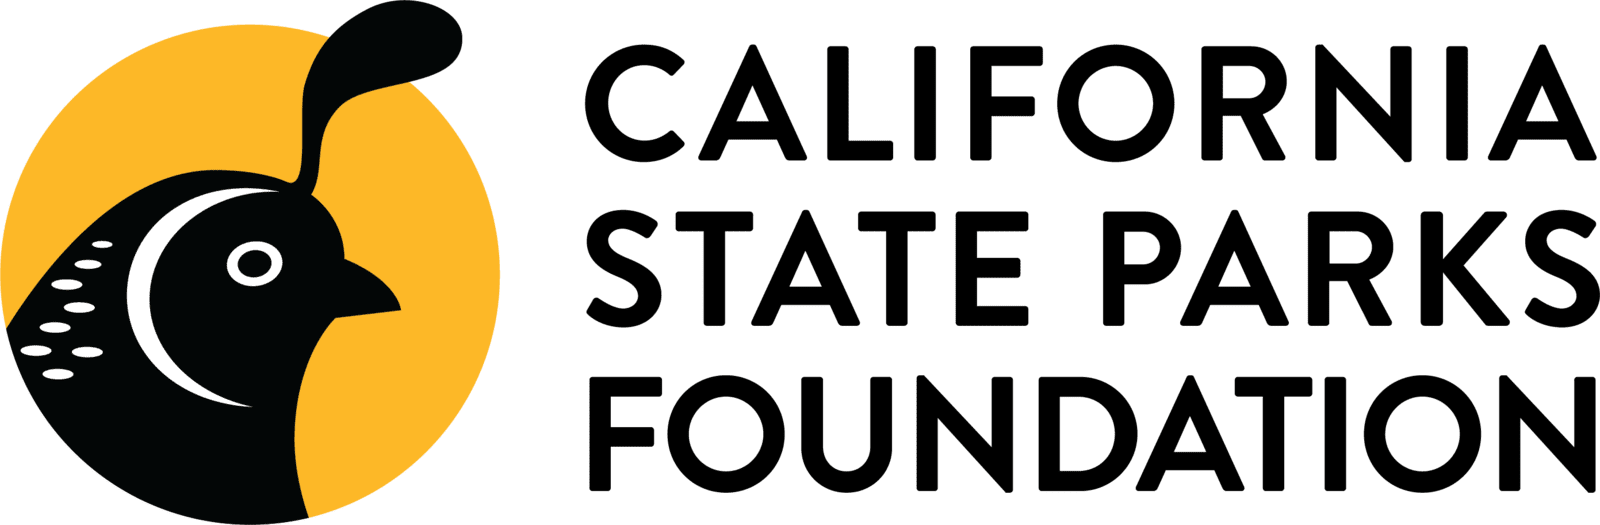 California State Parks Foundation-1